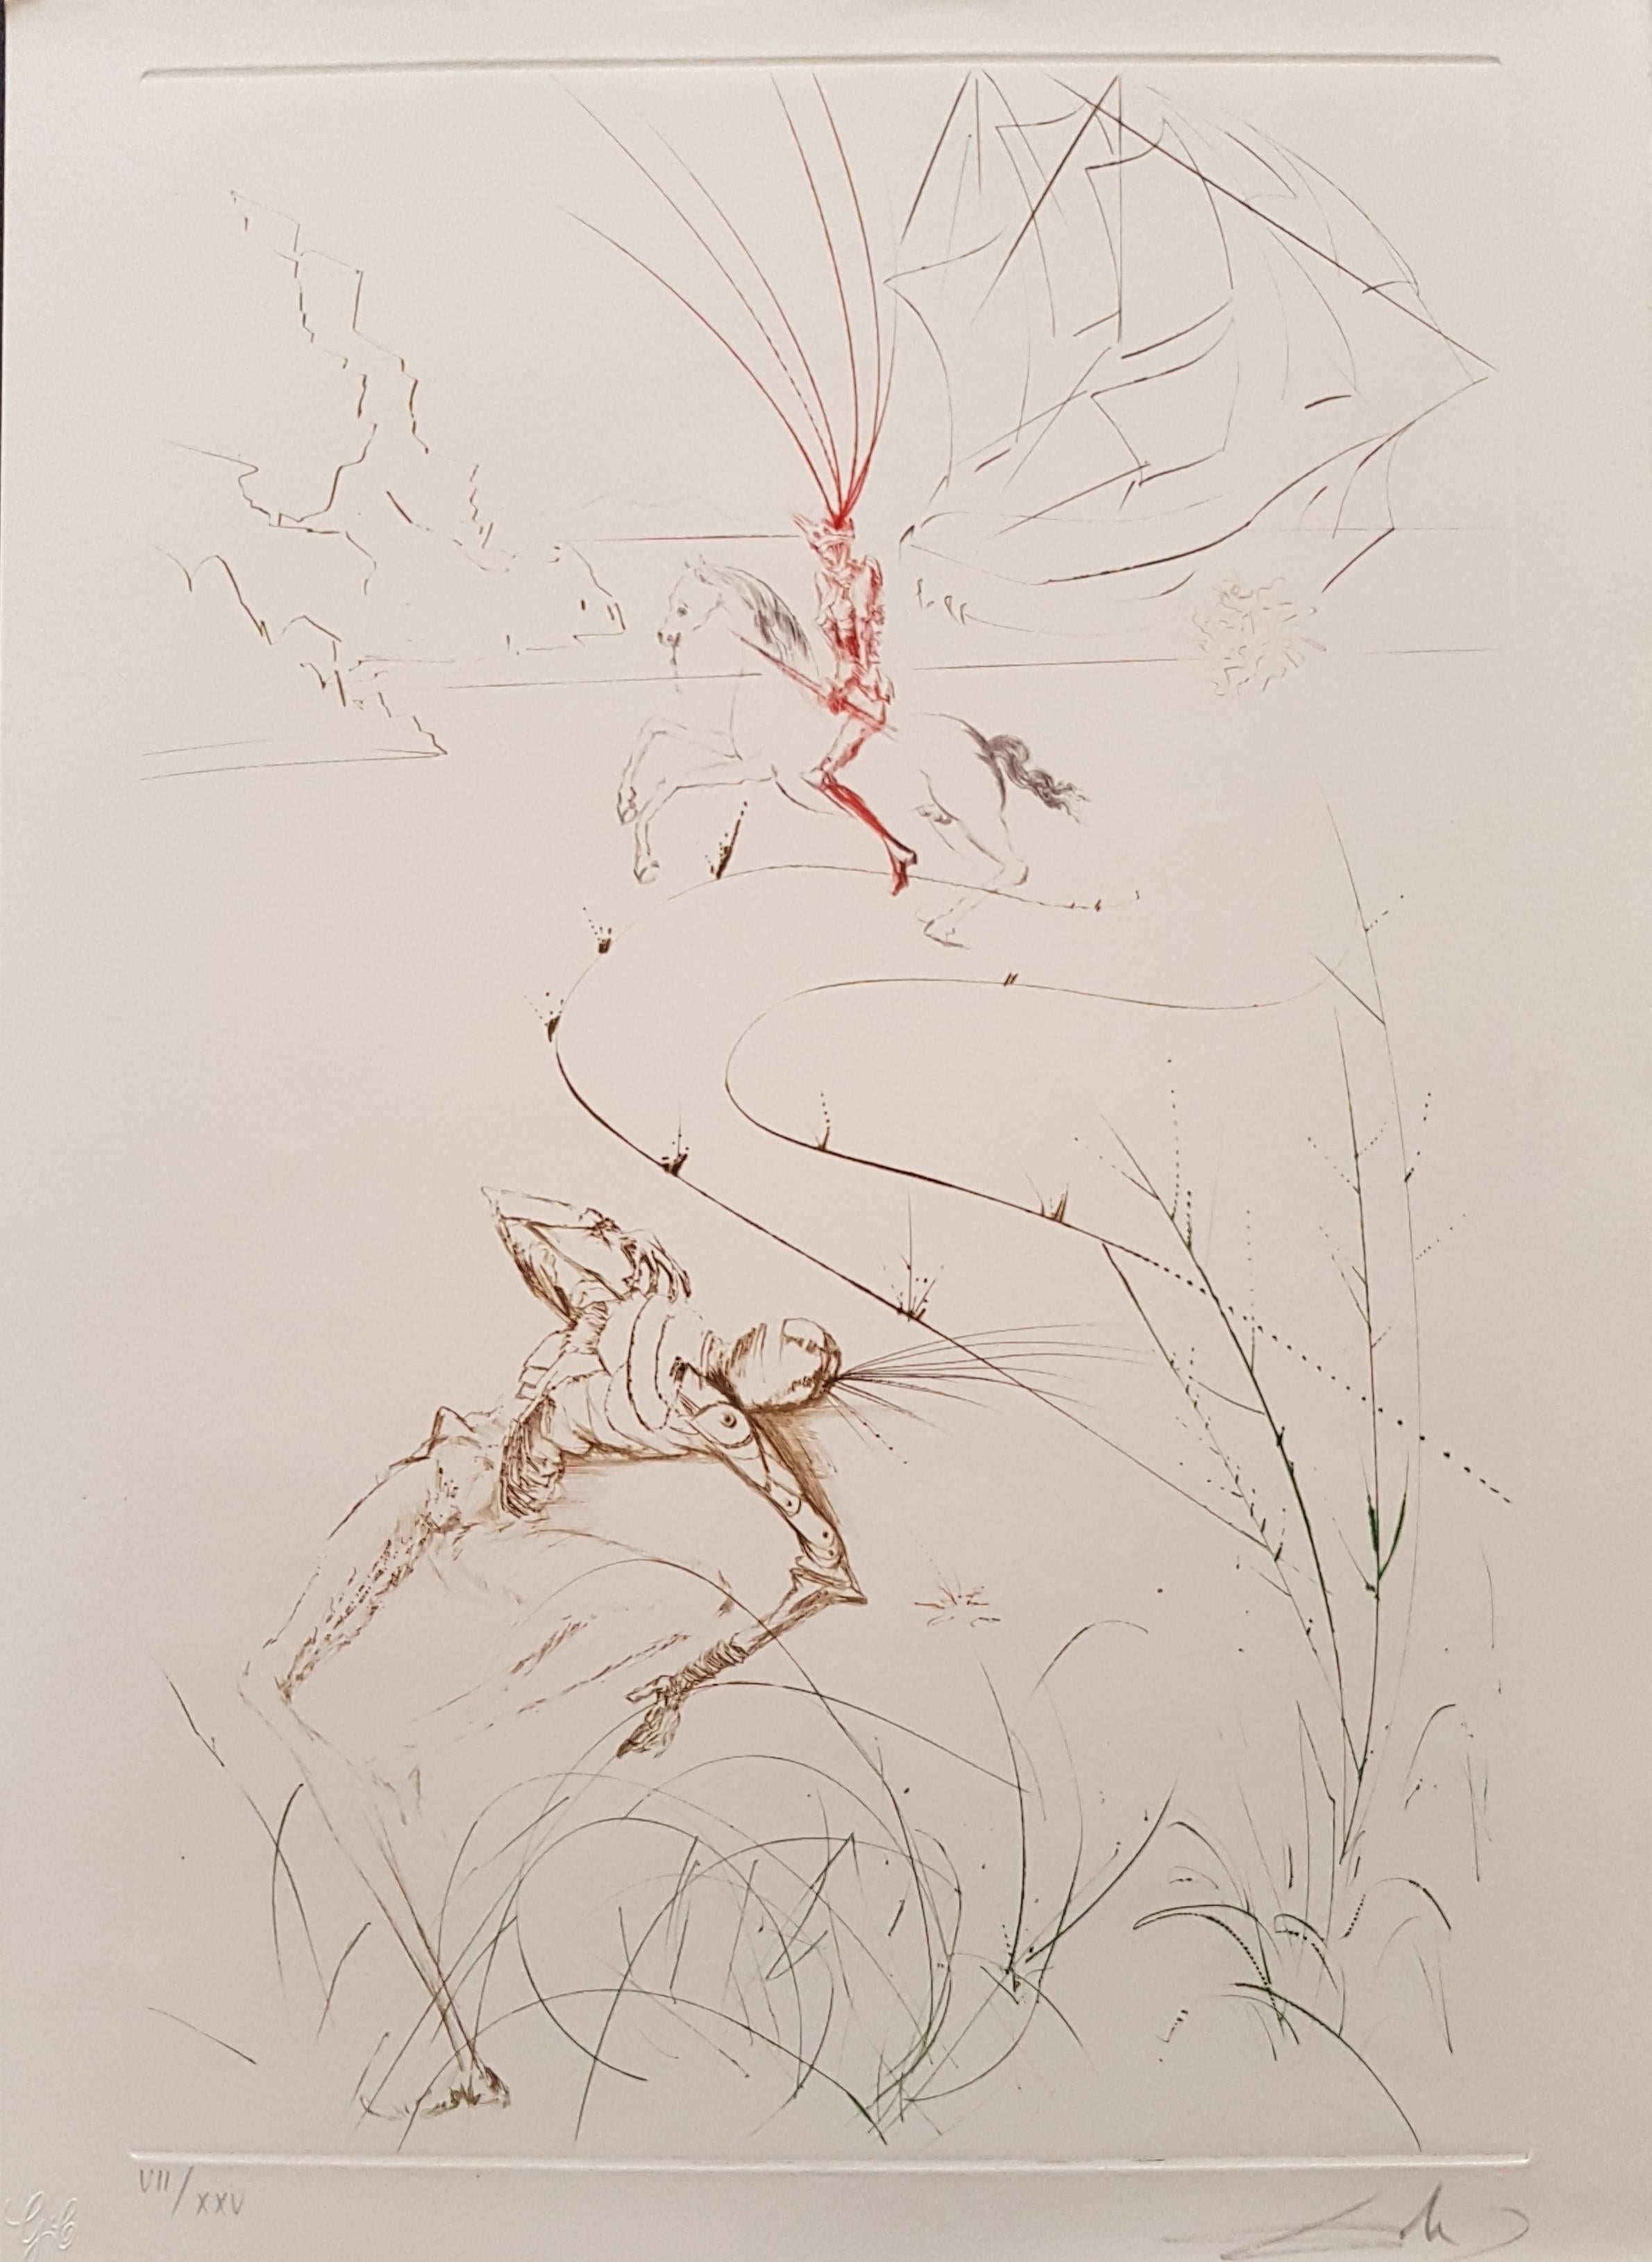 Salvador Dalí Abstract Print - Plate from "Tristan and Isolde": Tristan's Last Battle